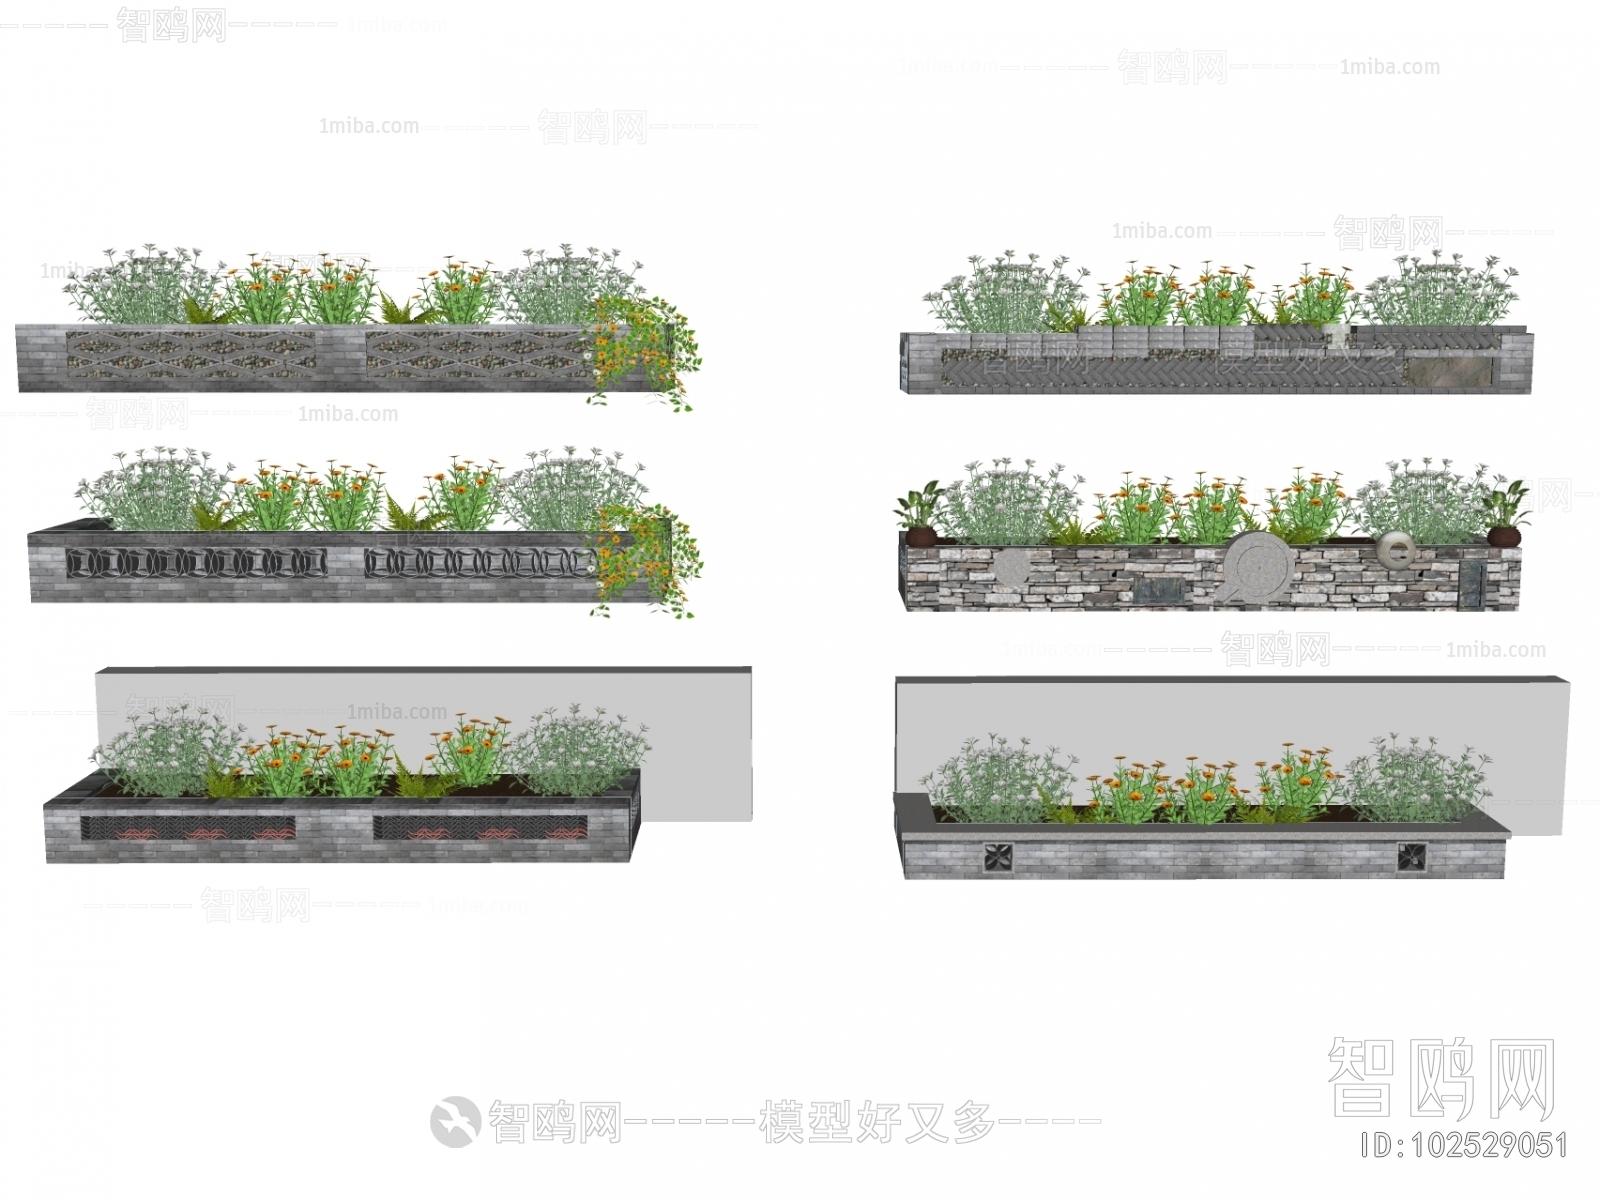 New Chinese Style Flower Bed, Flower Bowl, Flower Box